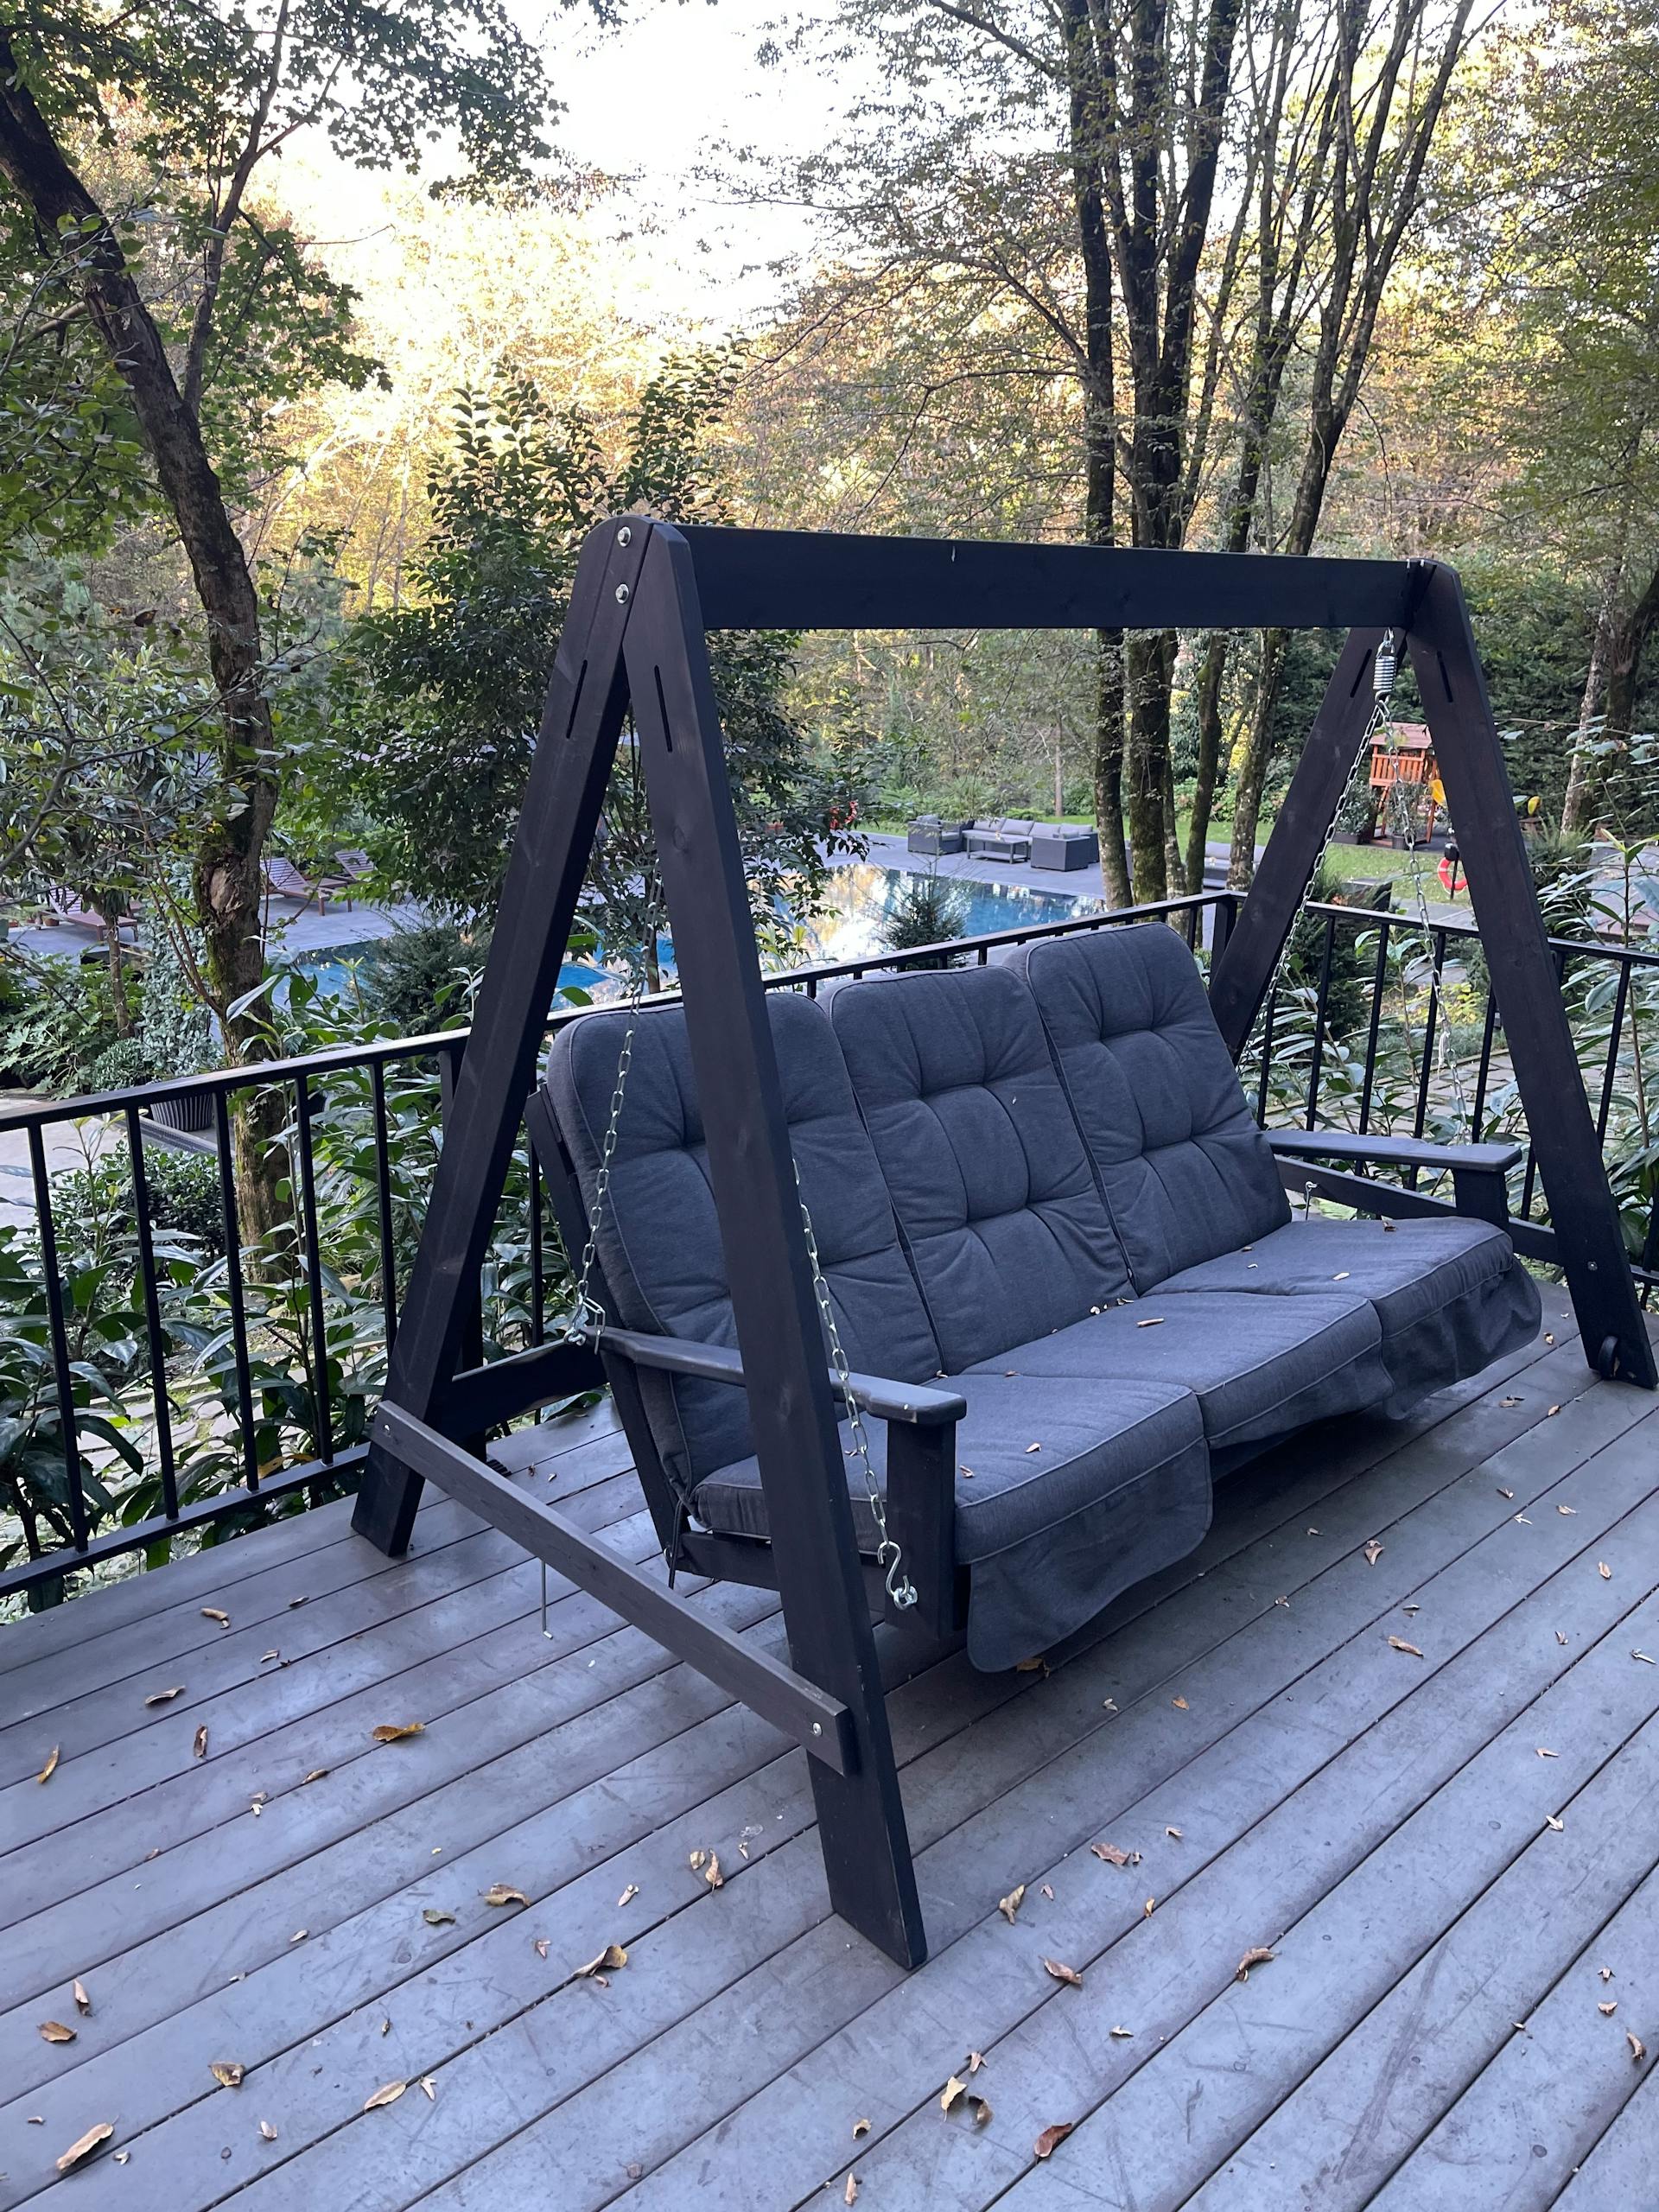 A cushioned porch swing | Source: Pexels